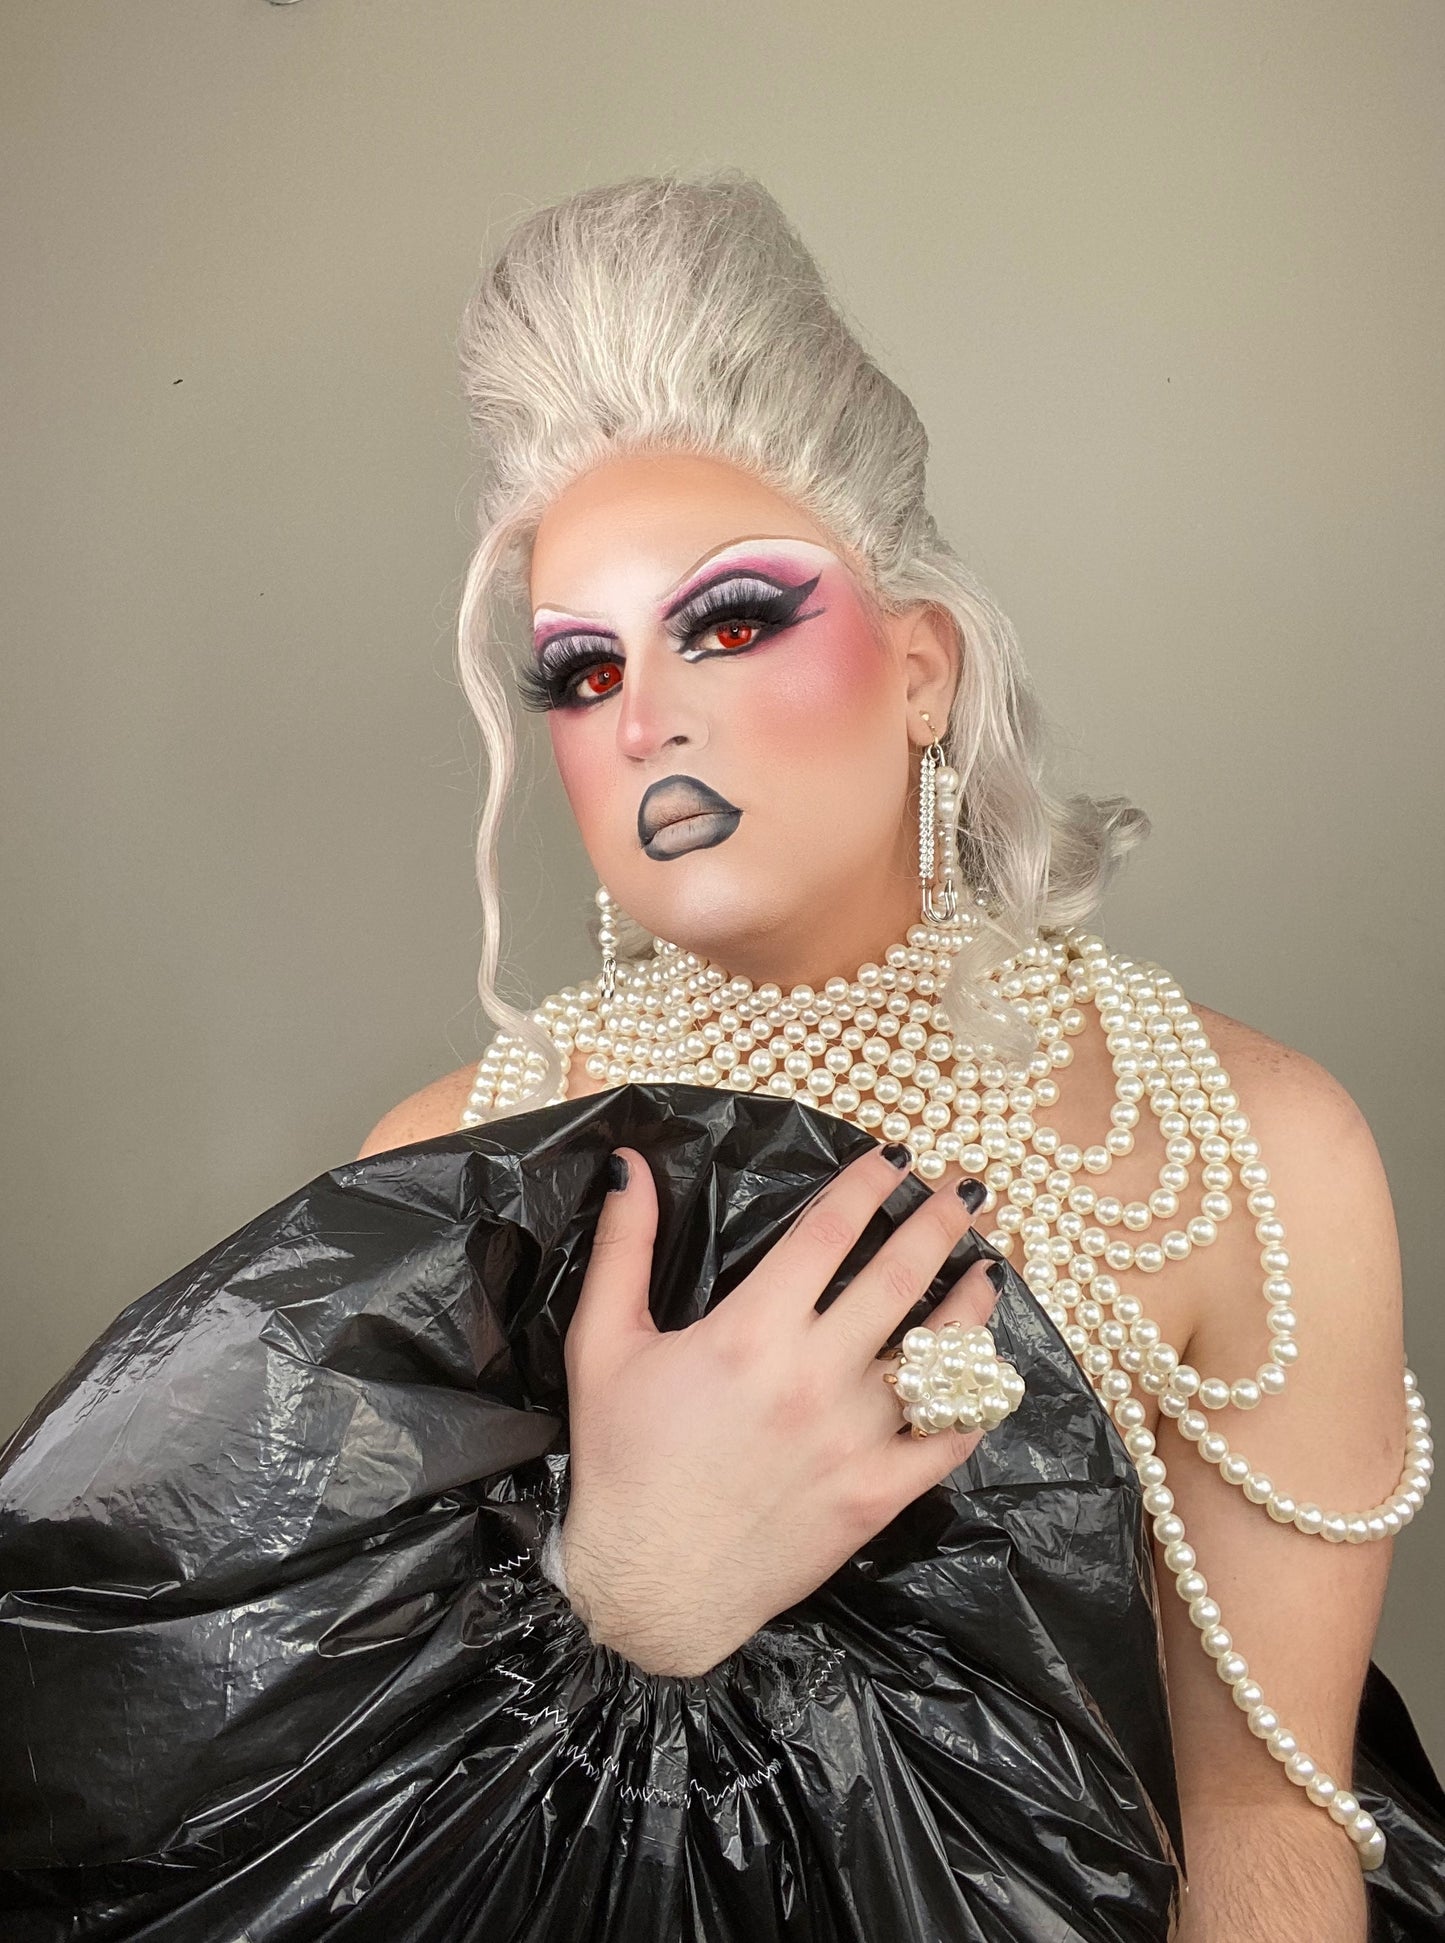 Book a Drag Queen in Madison, WI